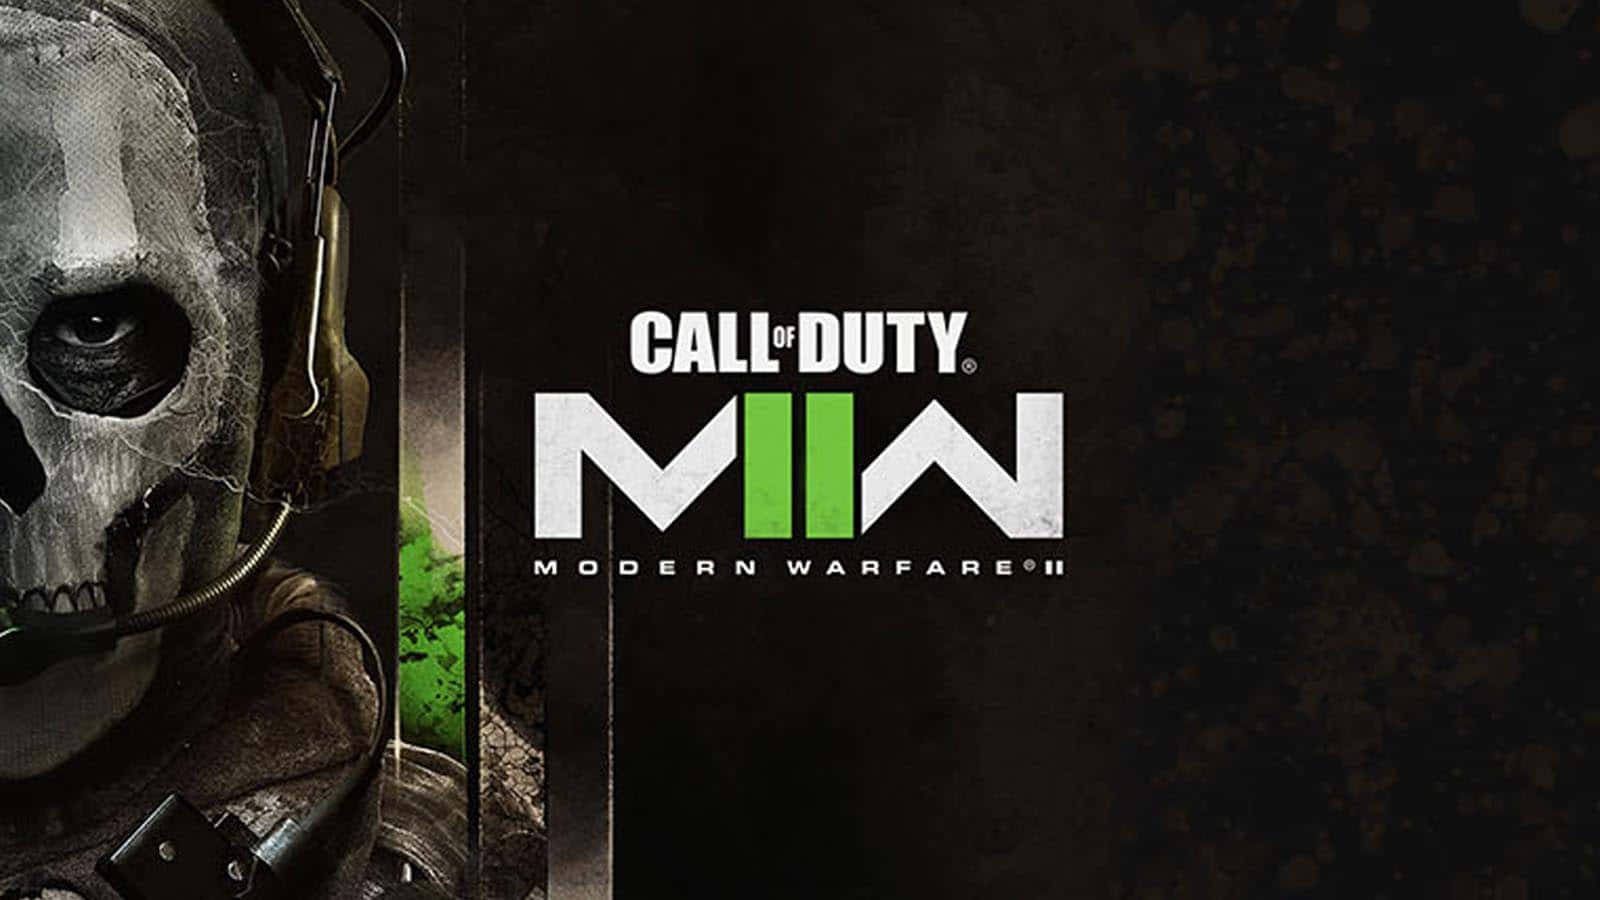 Call of Duty: Modern Warfare 2 is coming in October